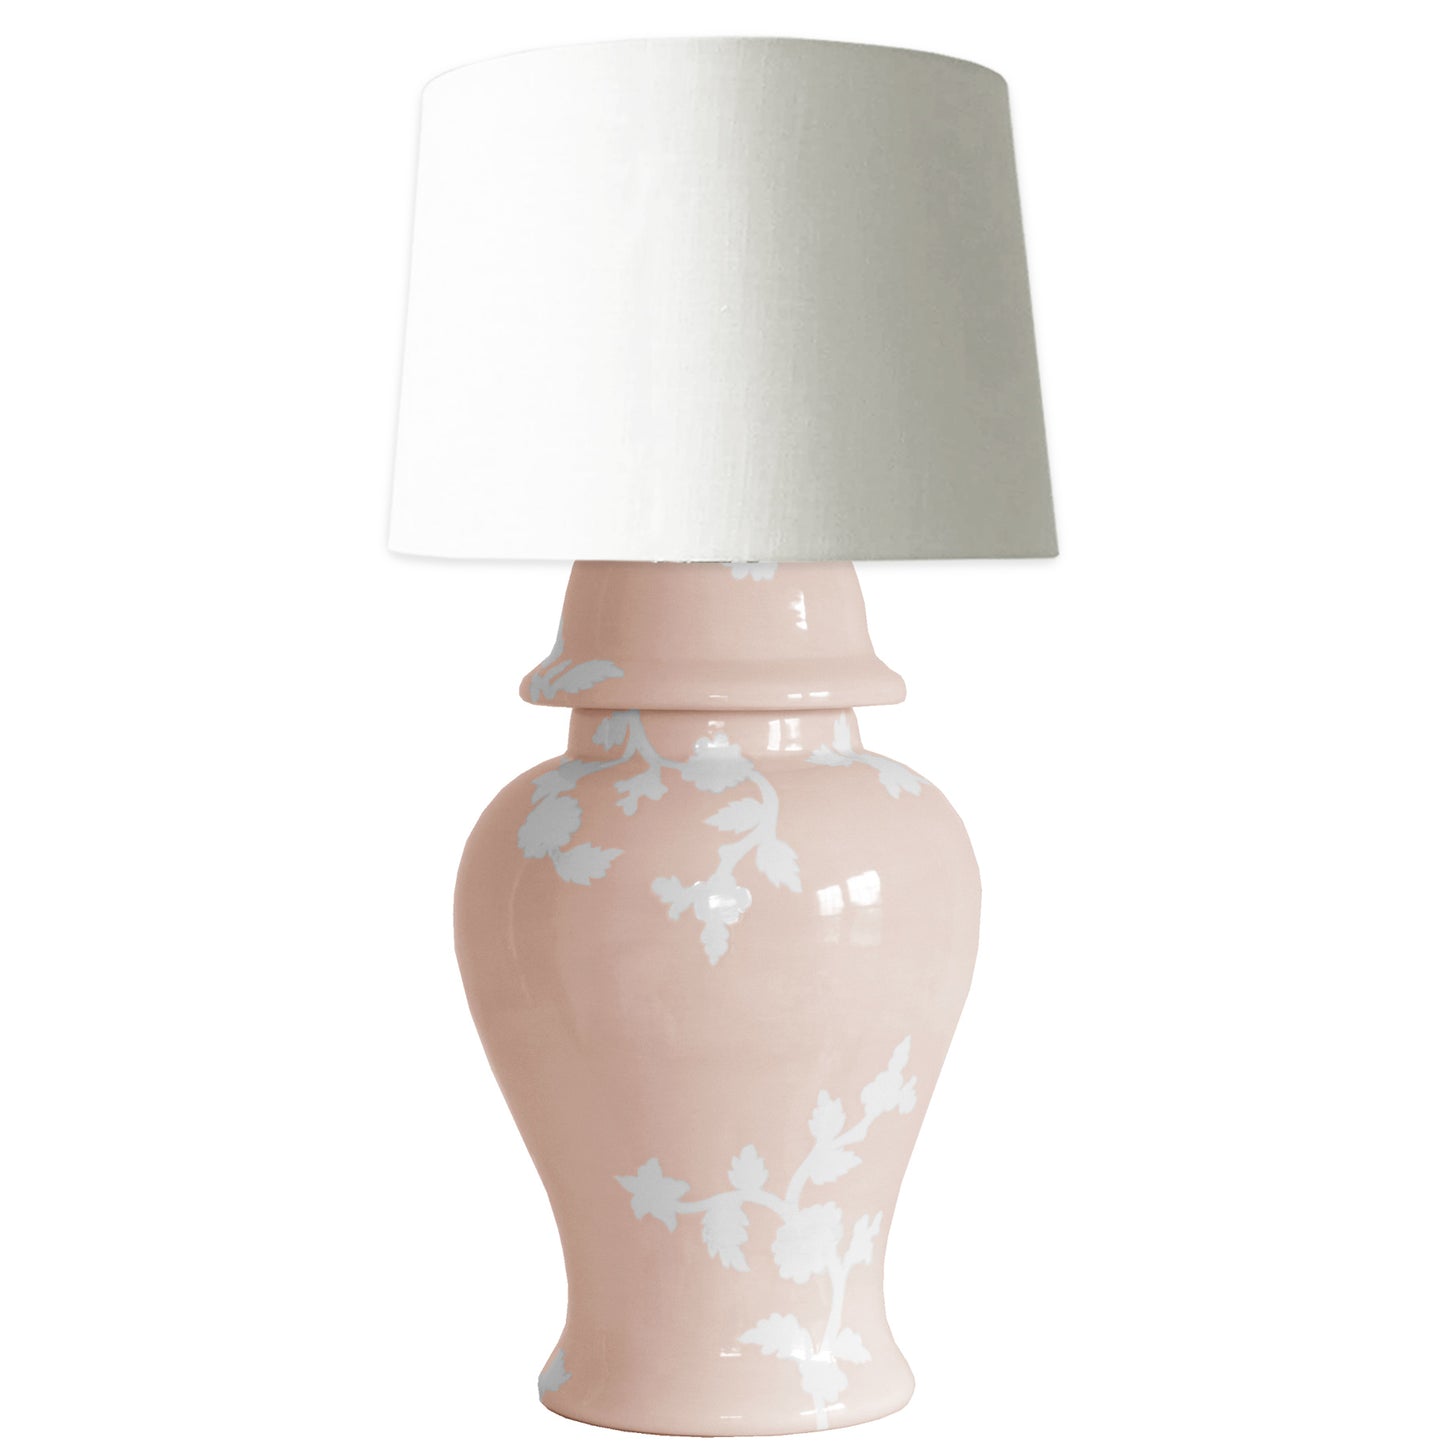 Chinoiserie Dreams Ginger Jar Lamp in Blush